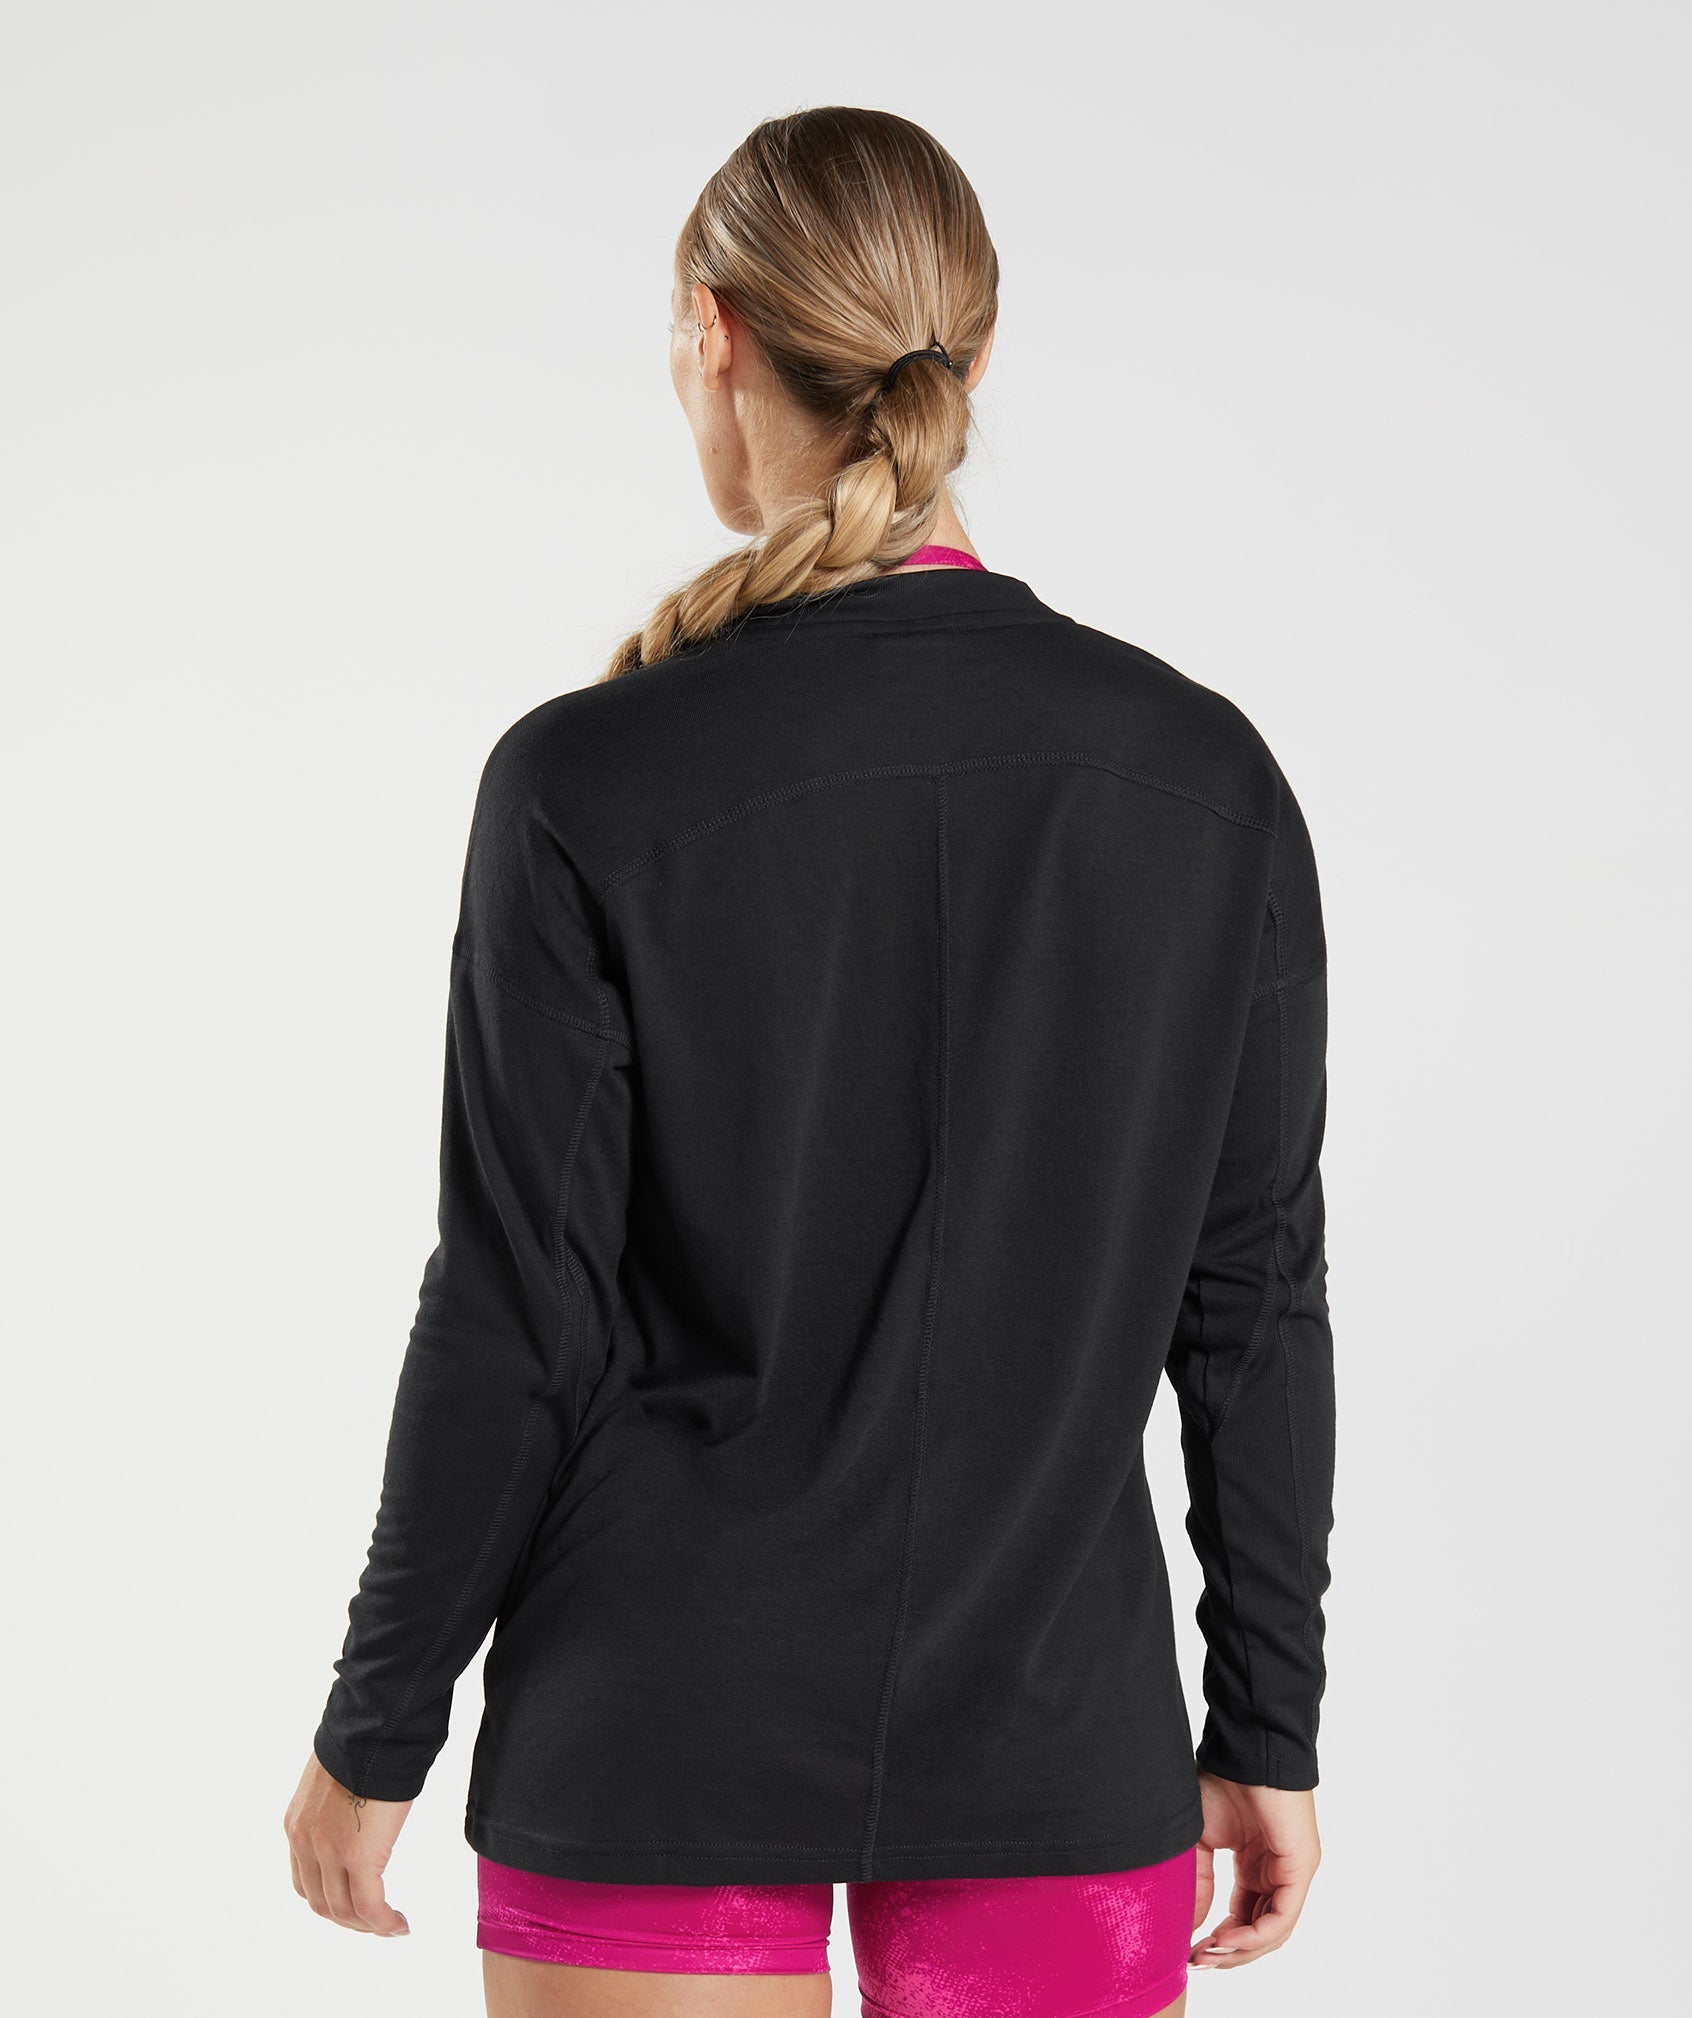 GS Power Long Sleeve T-Shirt in Black - view 2